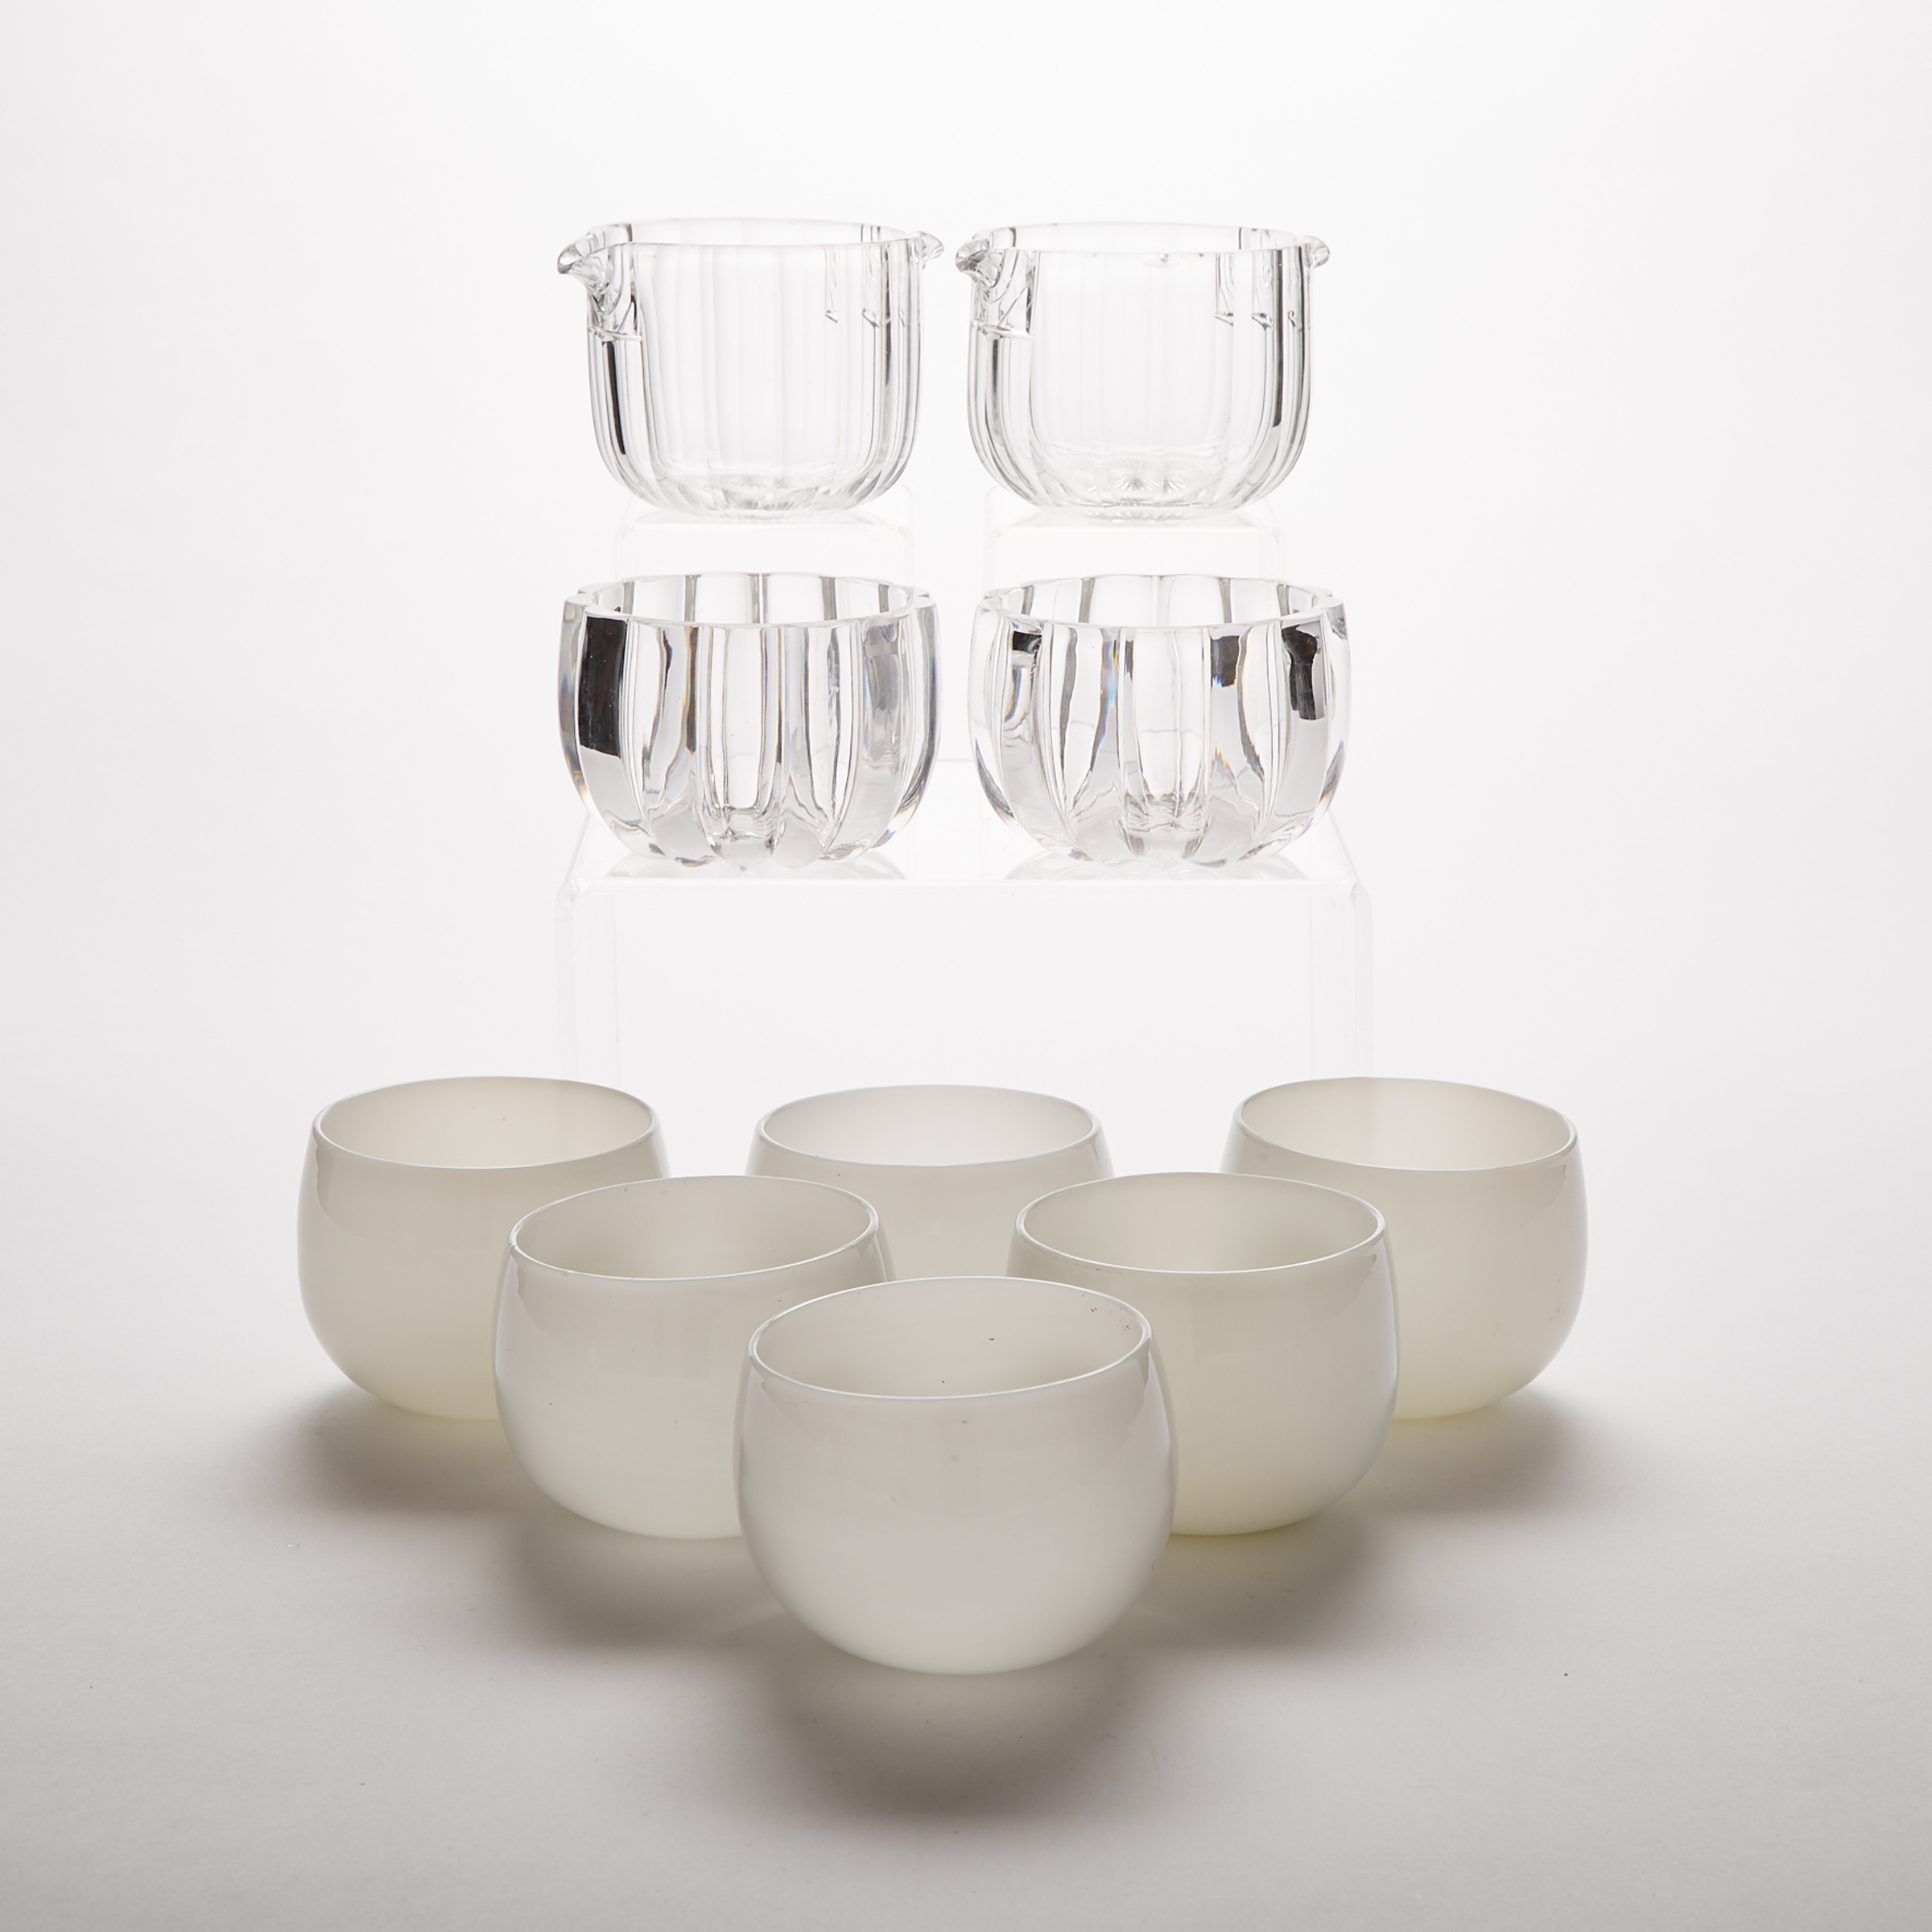 Two English Cut Glass Finger Bowls, Two Wine Glass Rinsers and Six Opaque White Glass Finger Bowls, possibly French, 19th century